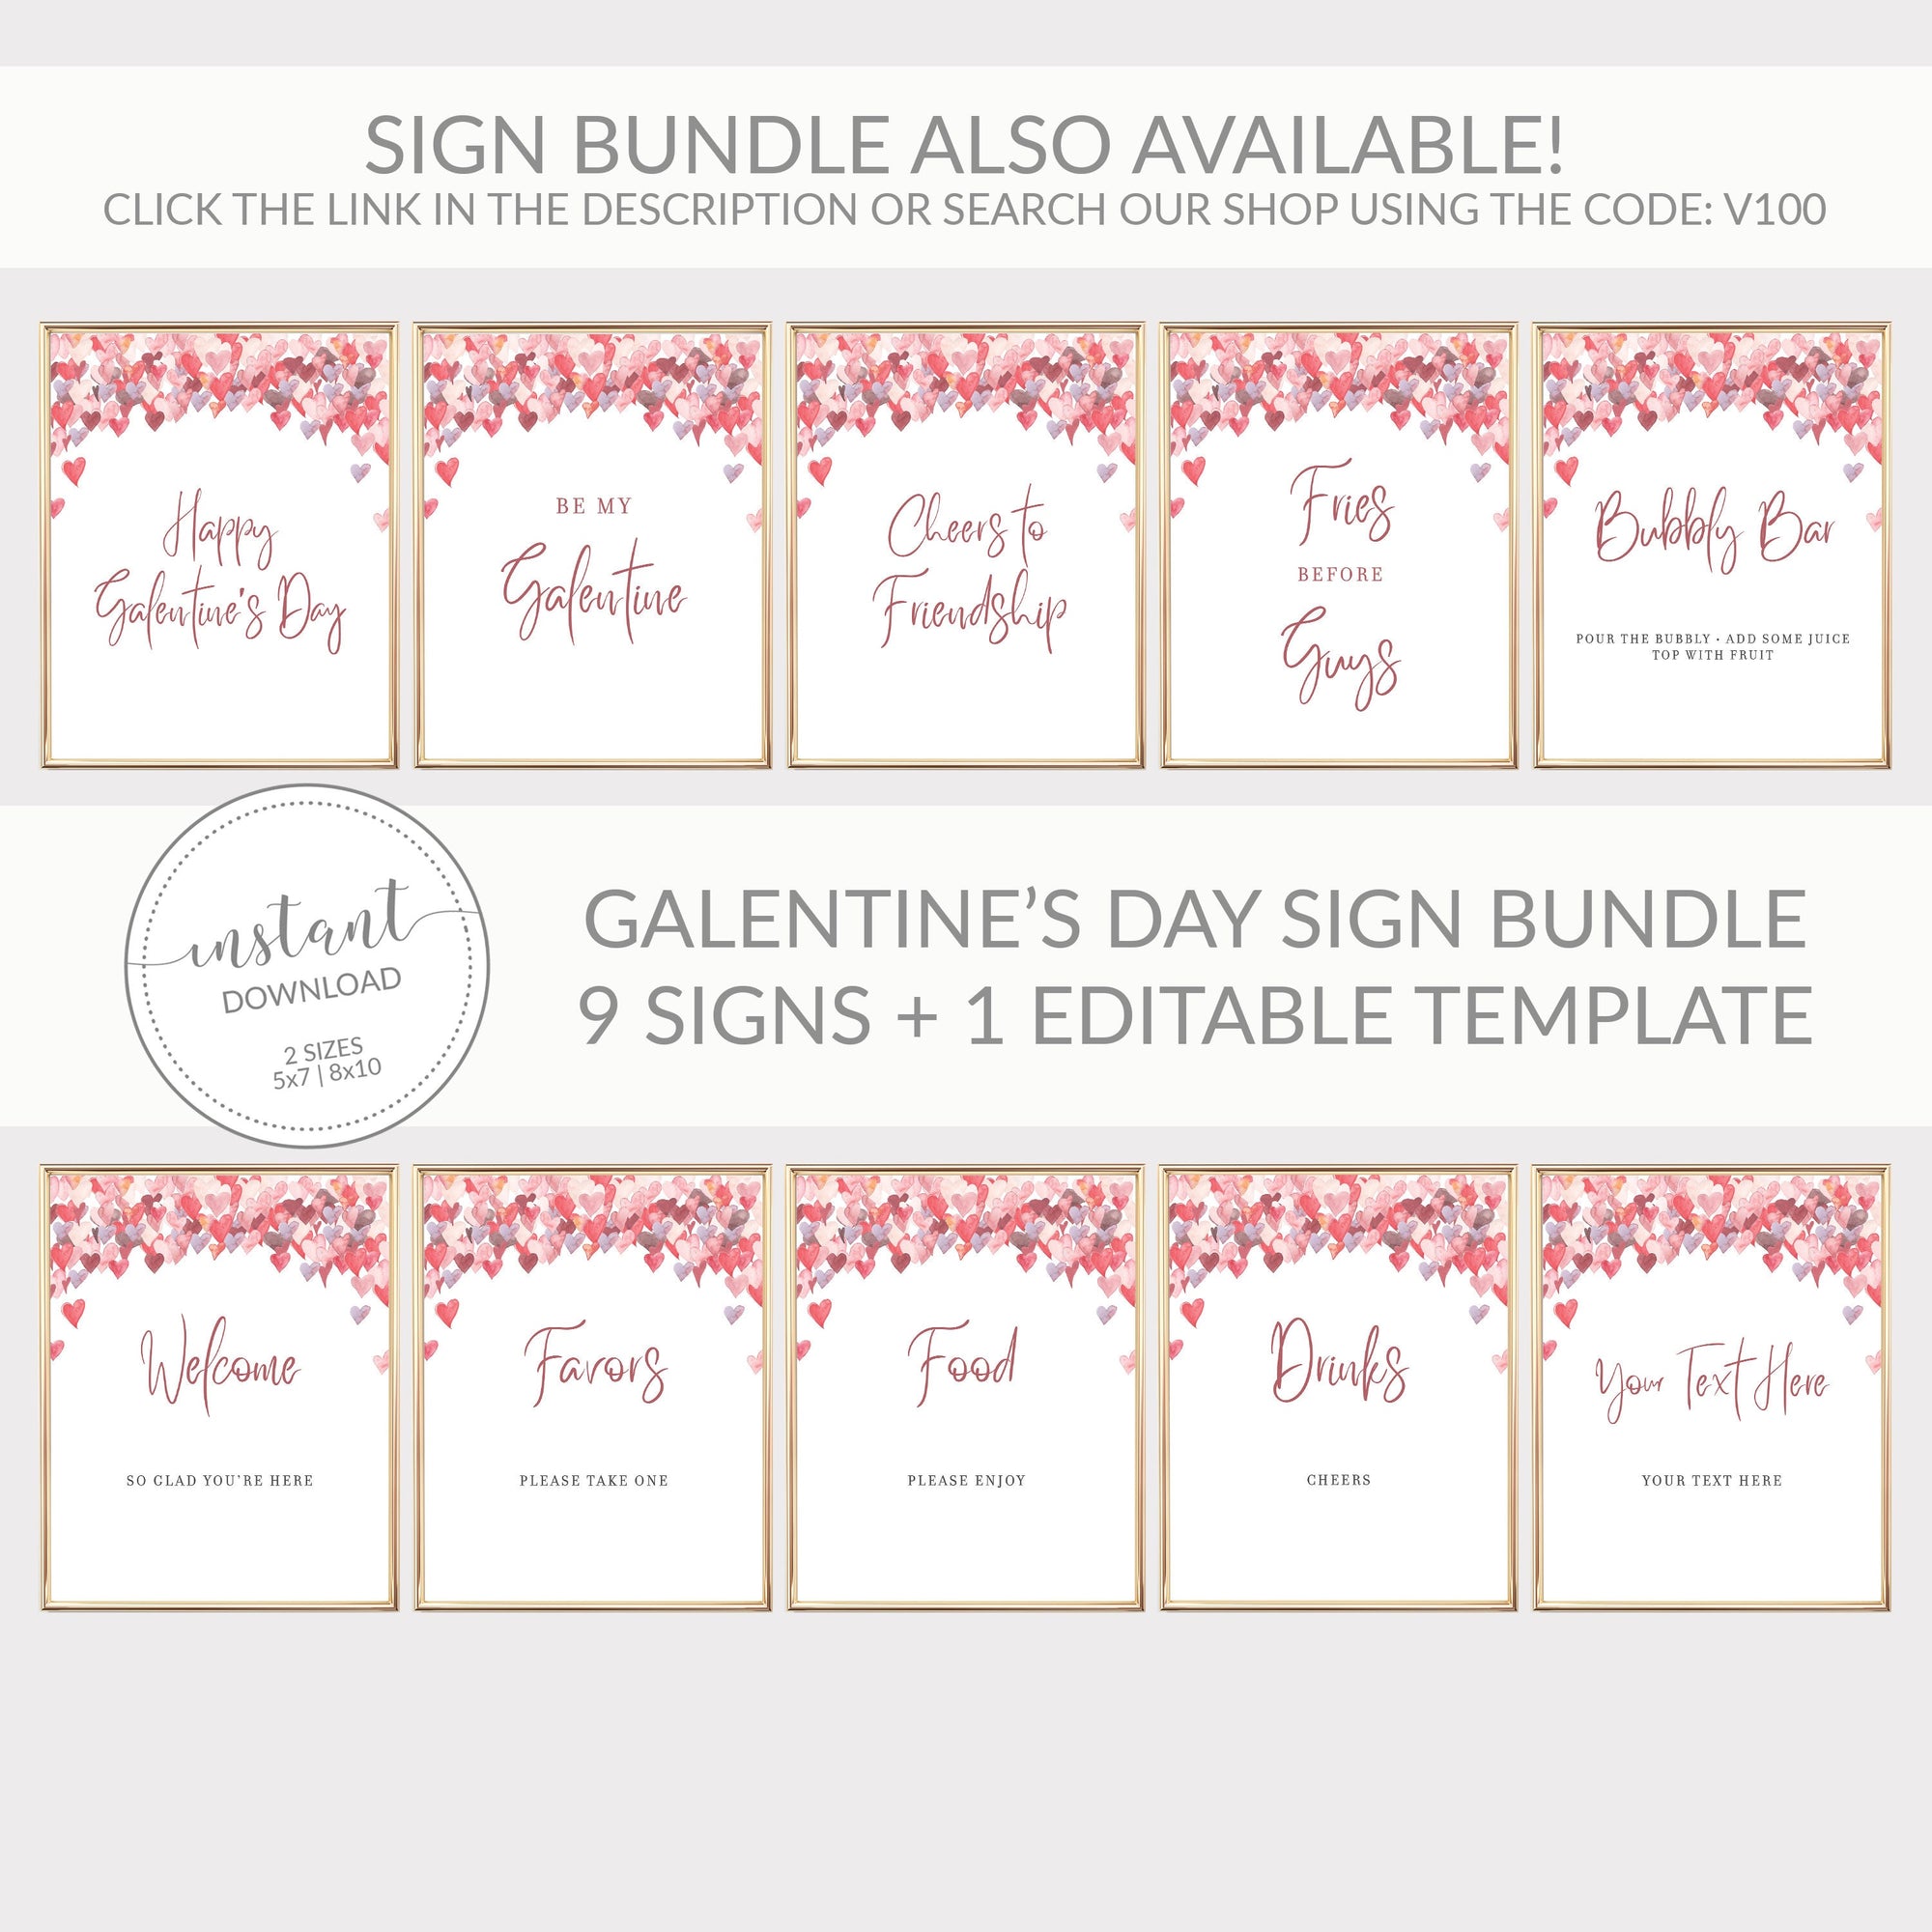 XOXO Sign Printable, Valentines Day Decor, Galentines Day Decor, Valentines Day Party Decorations, Galentines Party, INSTANT DOWNLOAD VH100